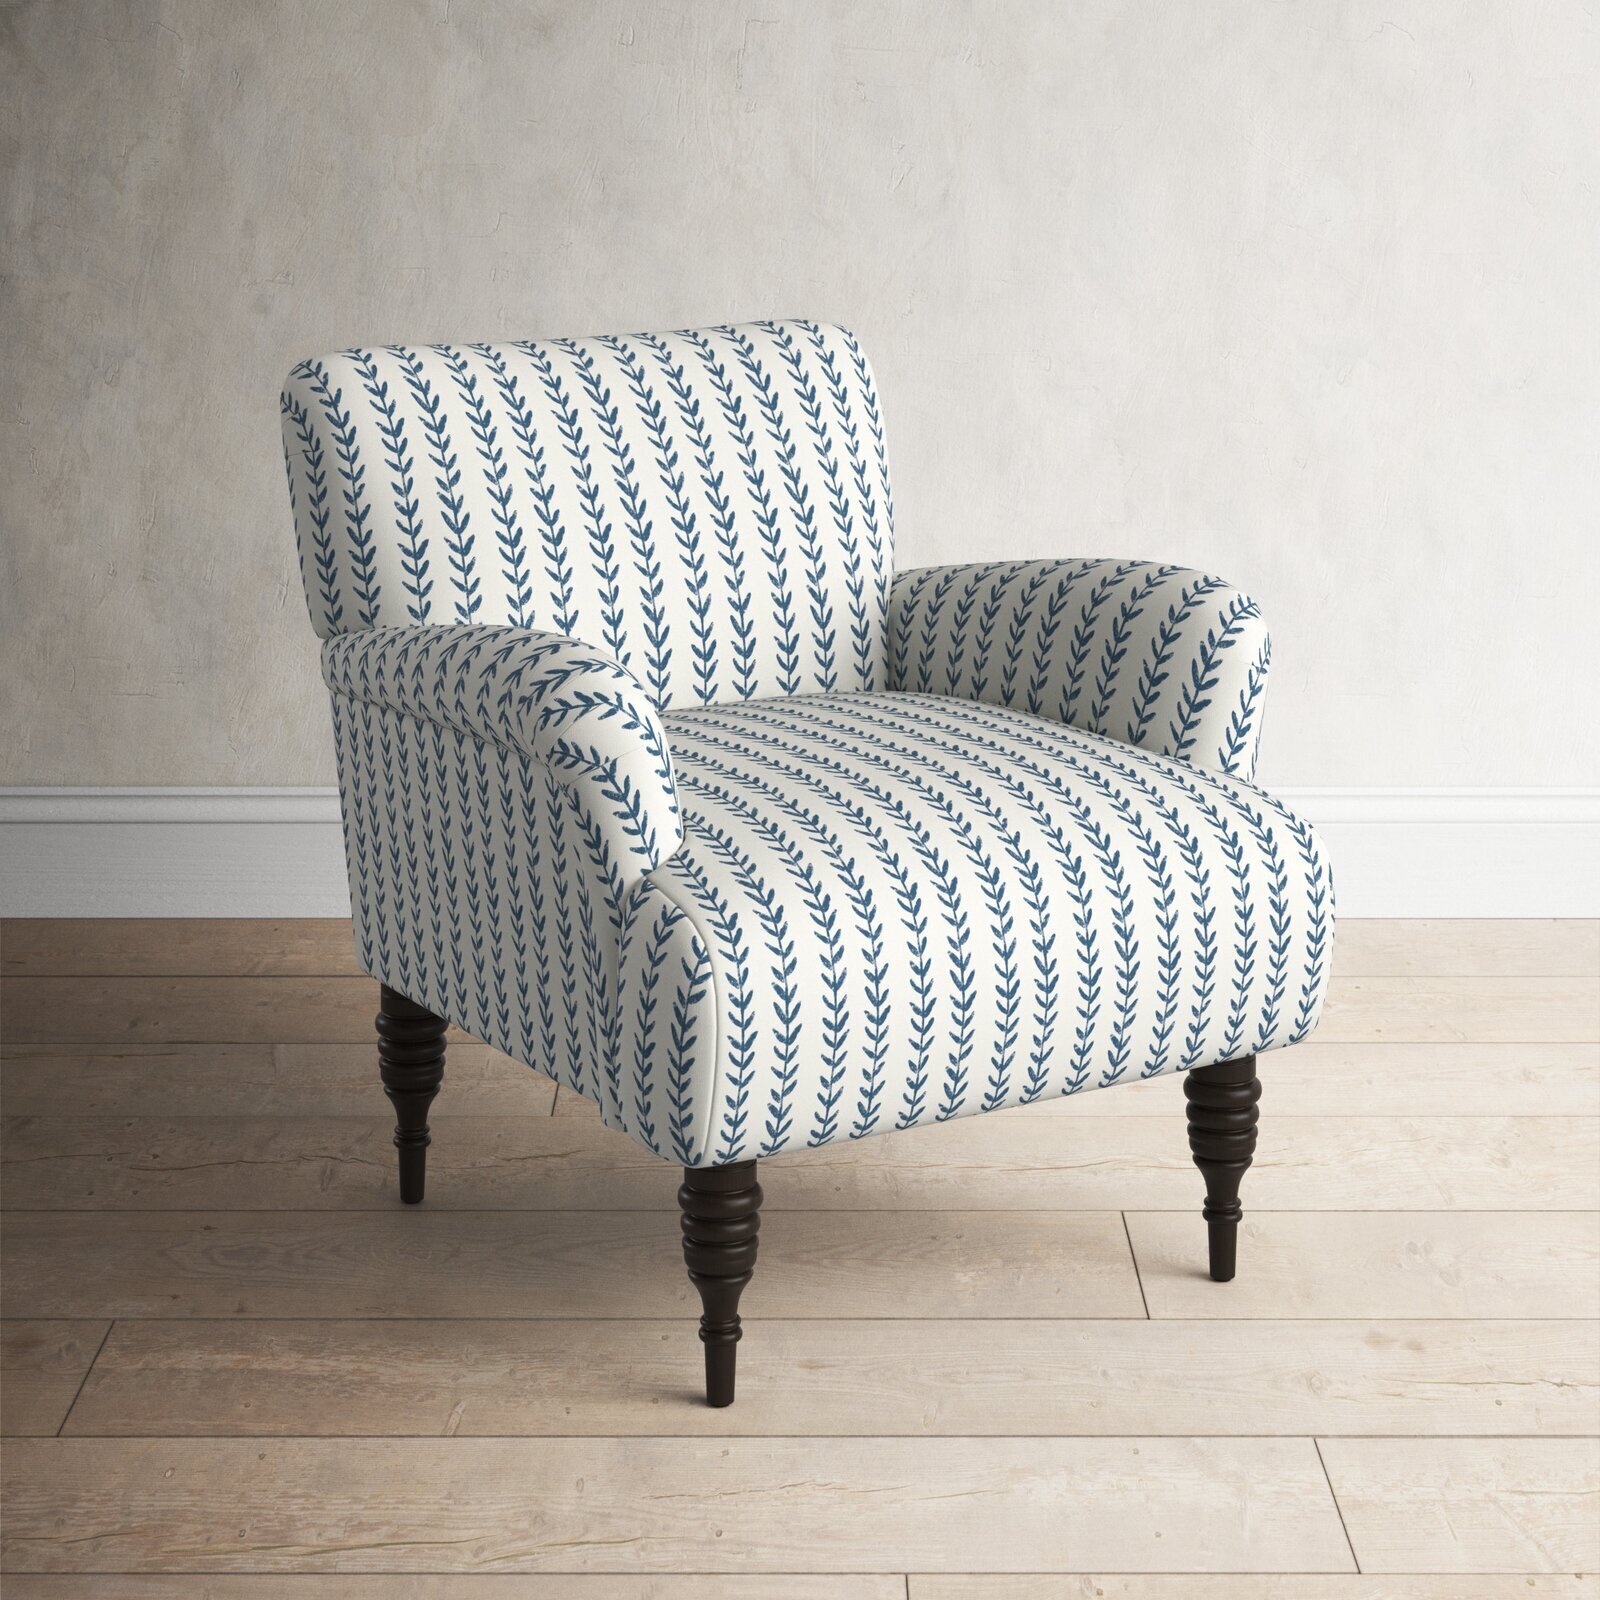 Southern Style Striped Armchair